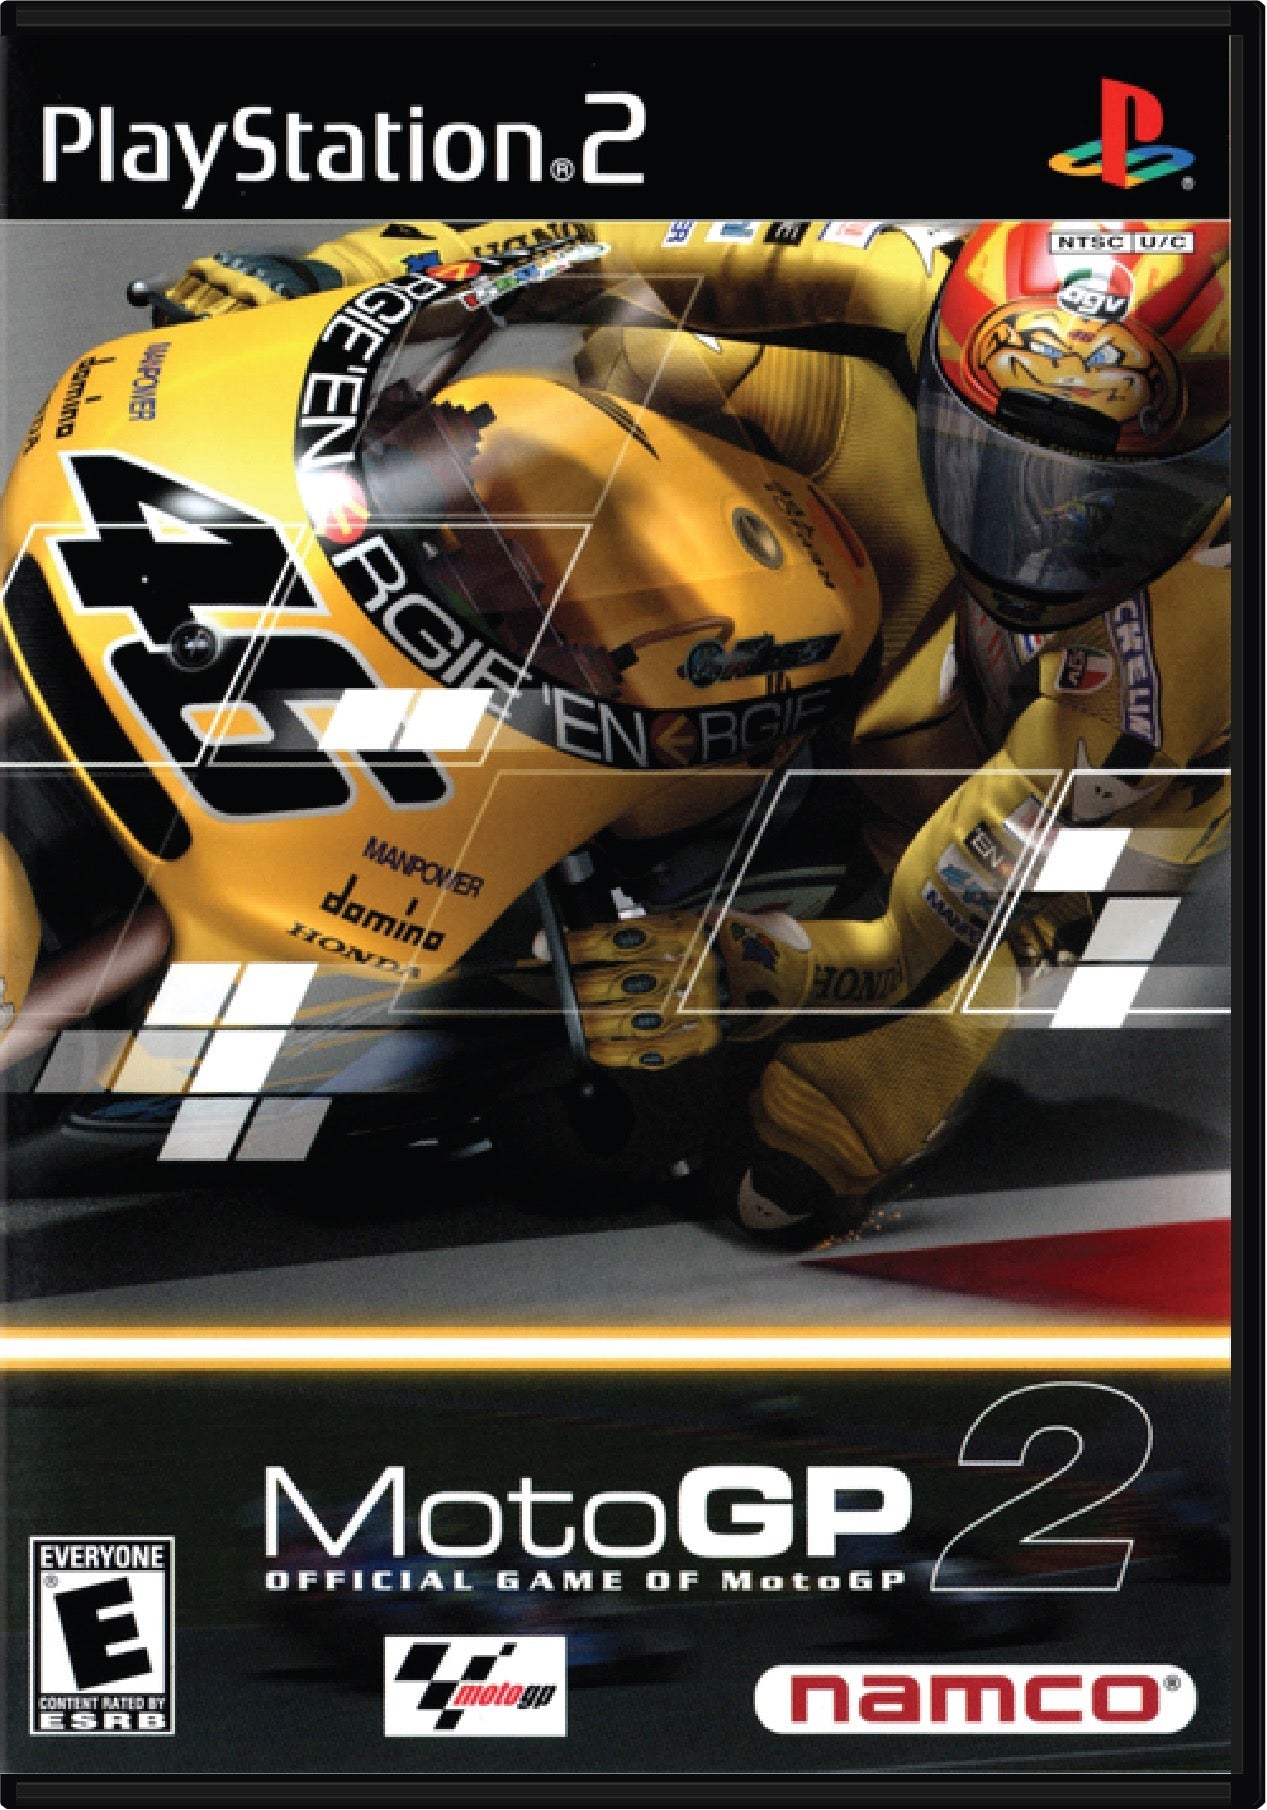 Moto GP 2 Cover Art and Product Photo